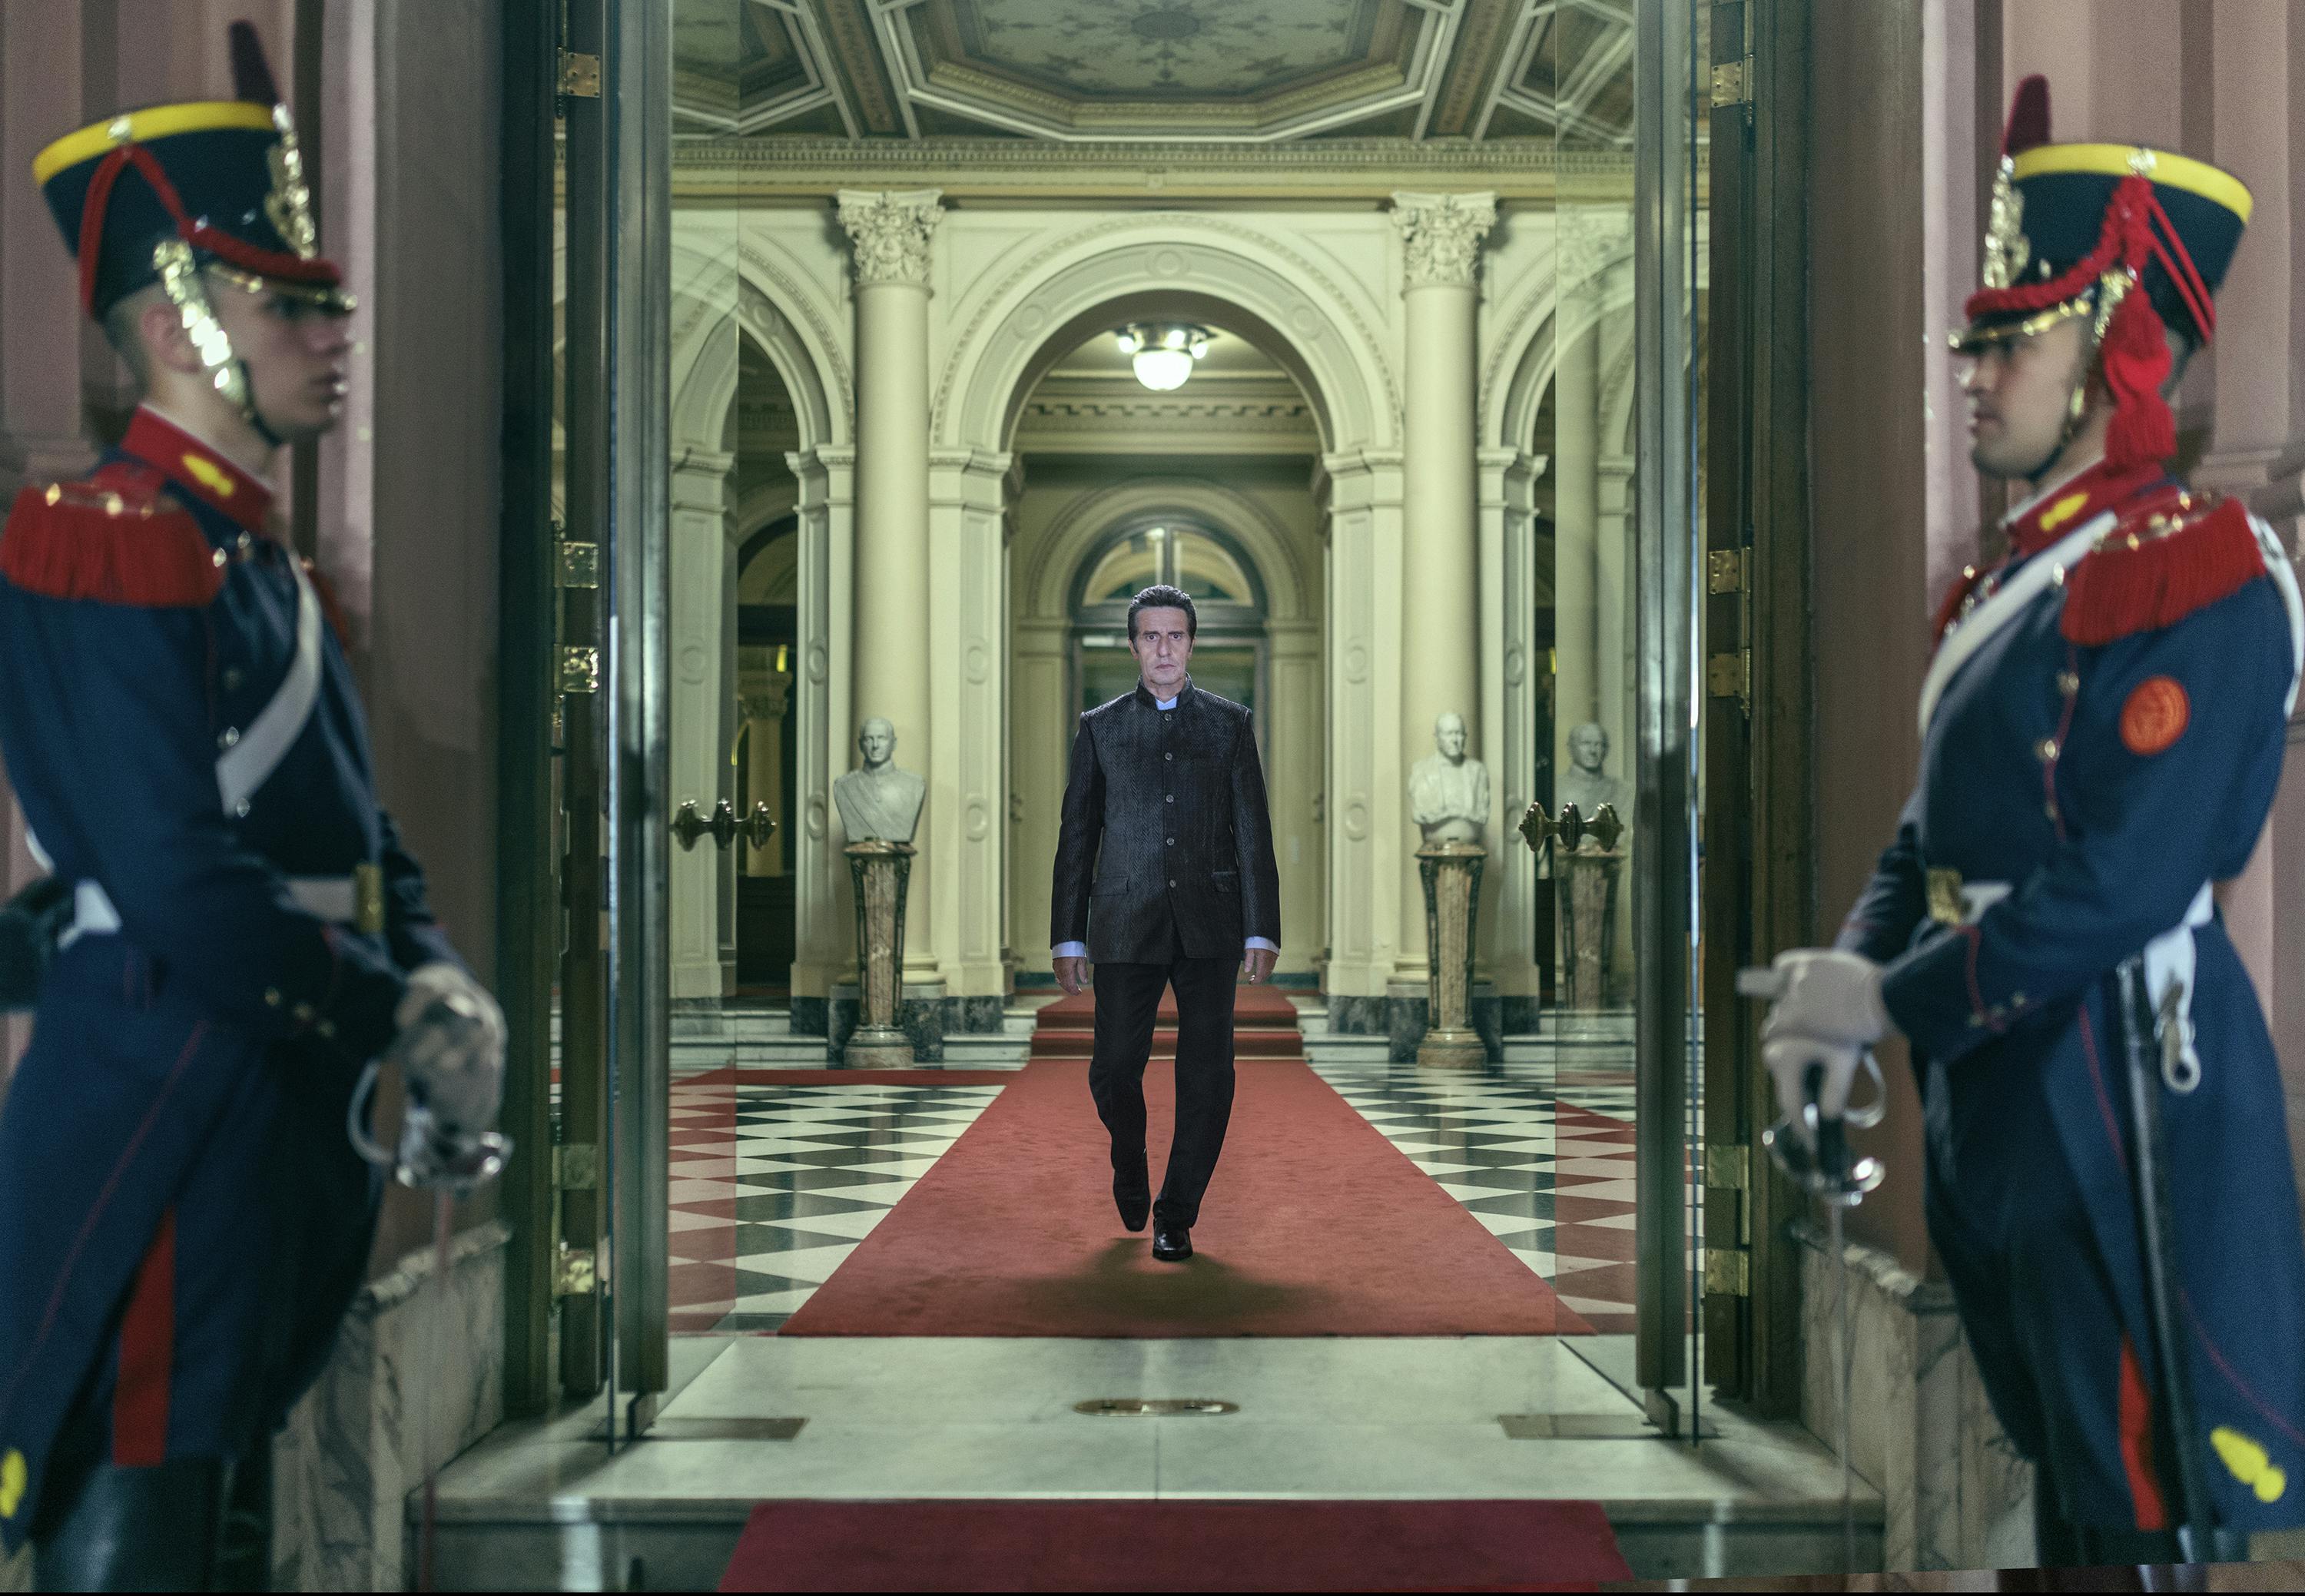 Emilio (Diego Peretti) walks down a red carpet through an open door, at which two guards stand in full uniform.